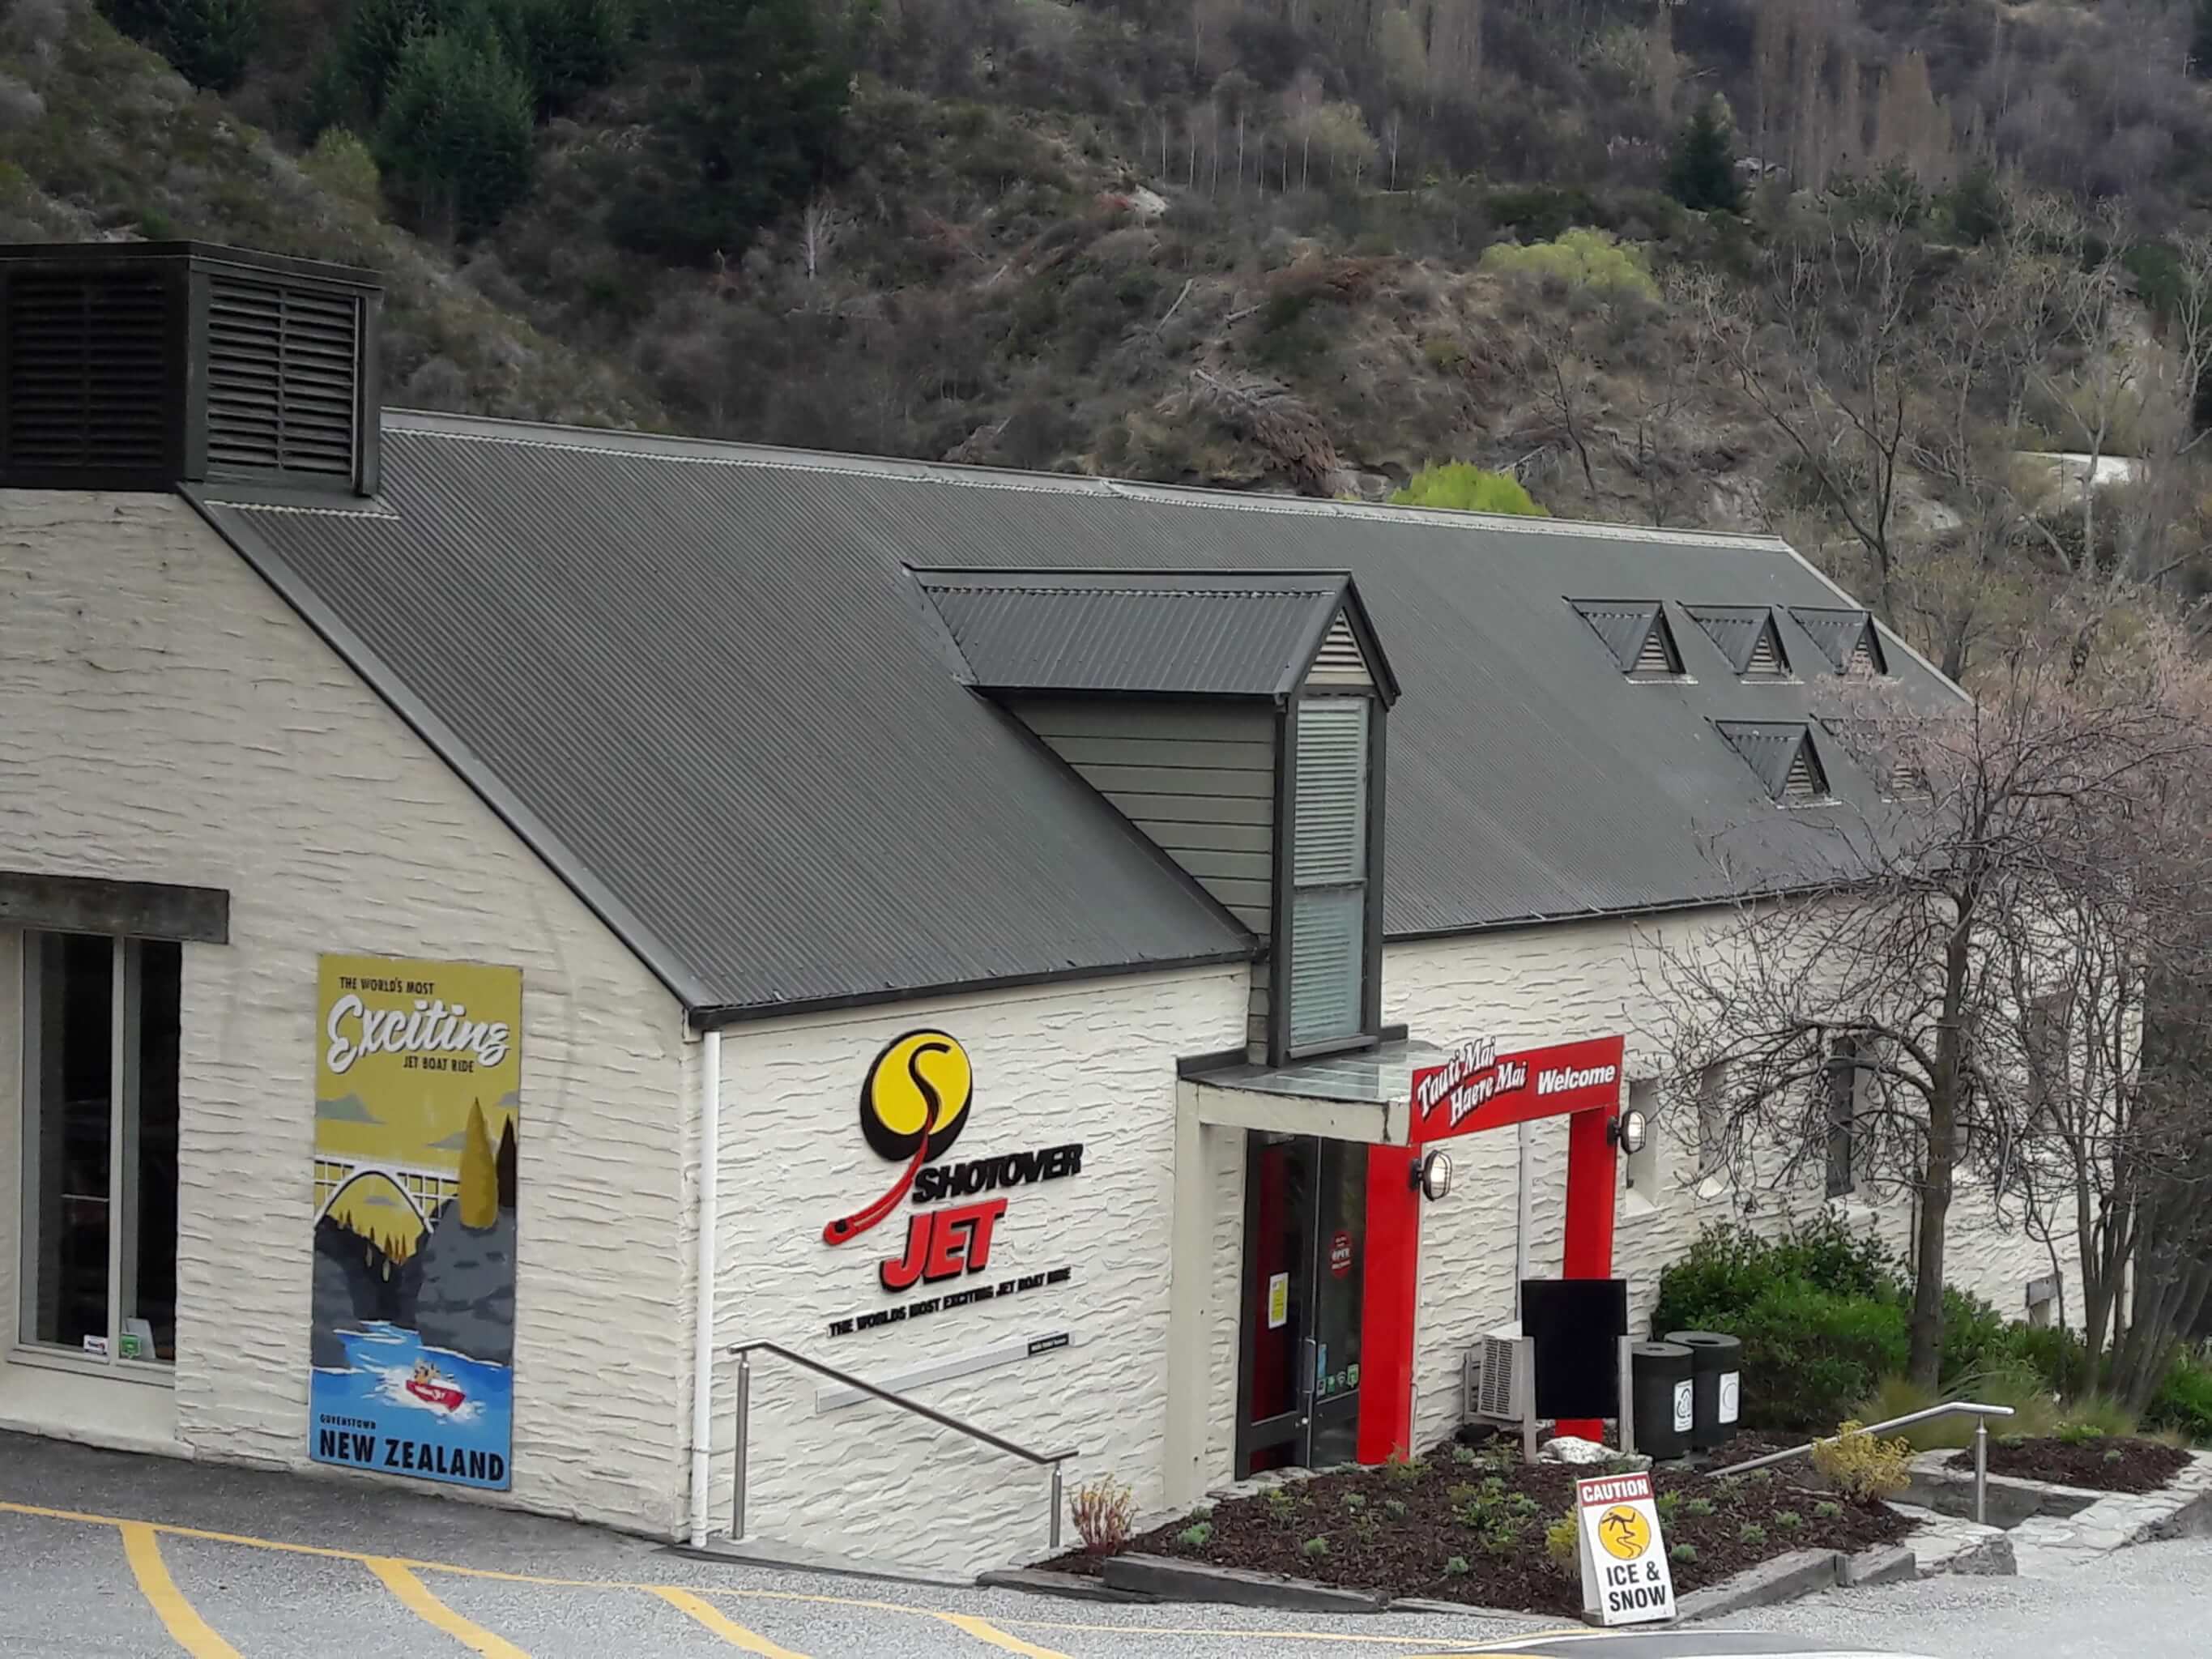 Our next adventure in Queenstown was the Shotover JET ride